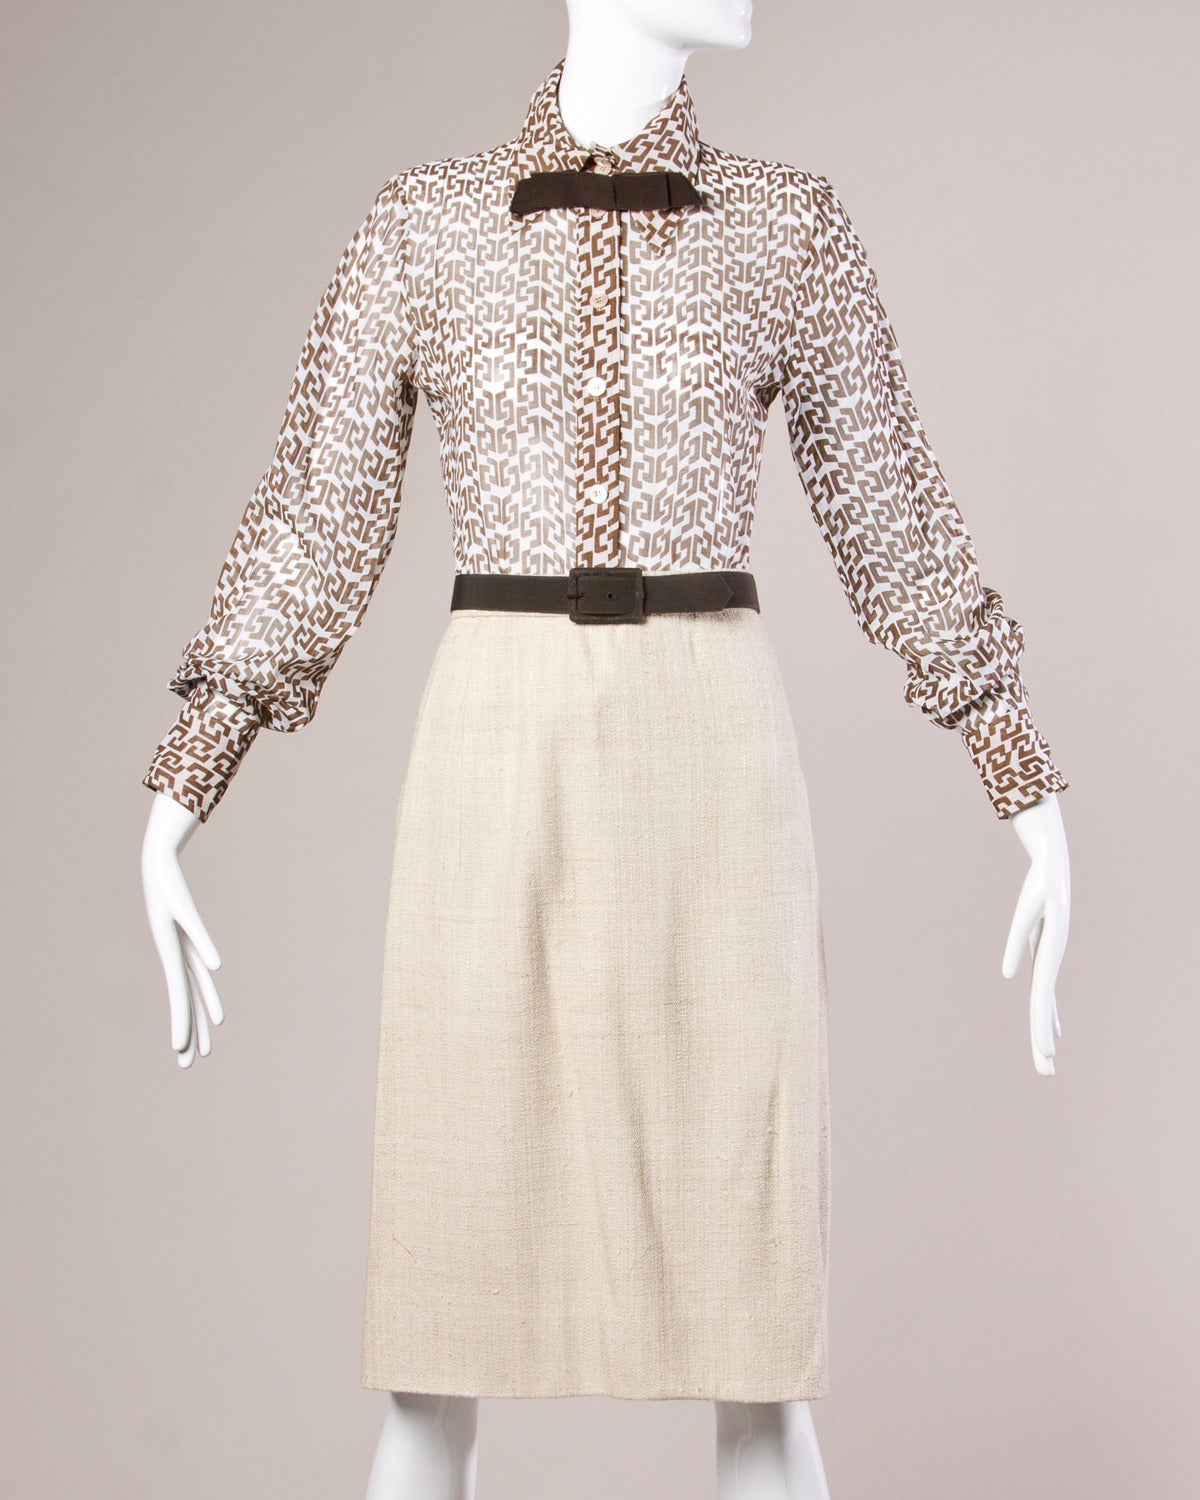 Reduced from $1,250. Unworn with the original price tags from Nan Duskin! Four-piece ensemble by Pauline Trigere includes a pencil skirt, jacket, blouse and belt. Wear together or separately.

Details:

Partially Lined
Matching Belt
Button